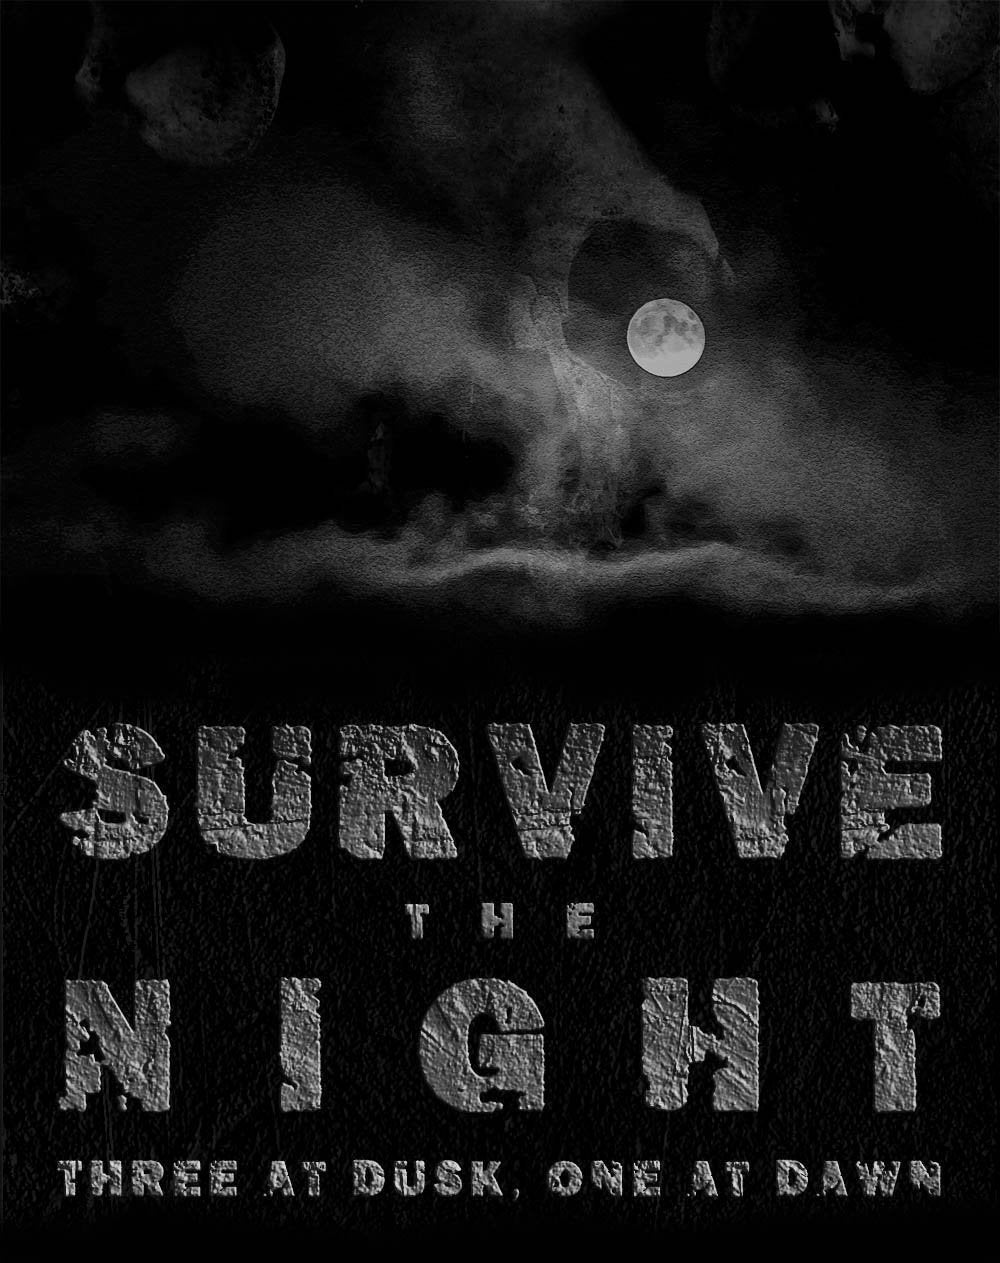 Thank You For Sending Us Your Story for Survive the Night: Three at Dusk, One at Dawn - Writing Contest Submission Window is Now Closed